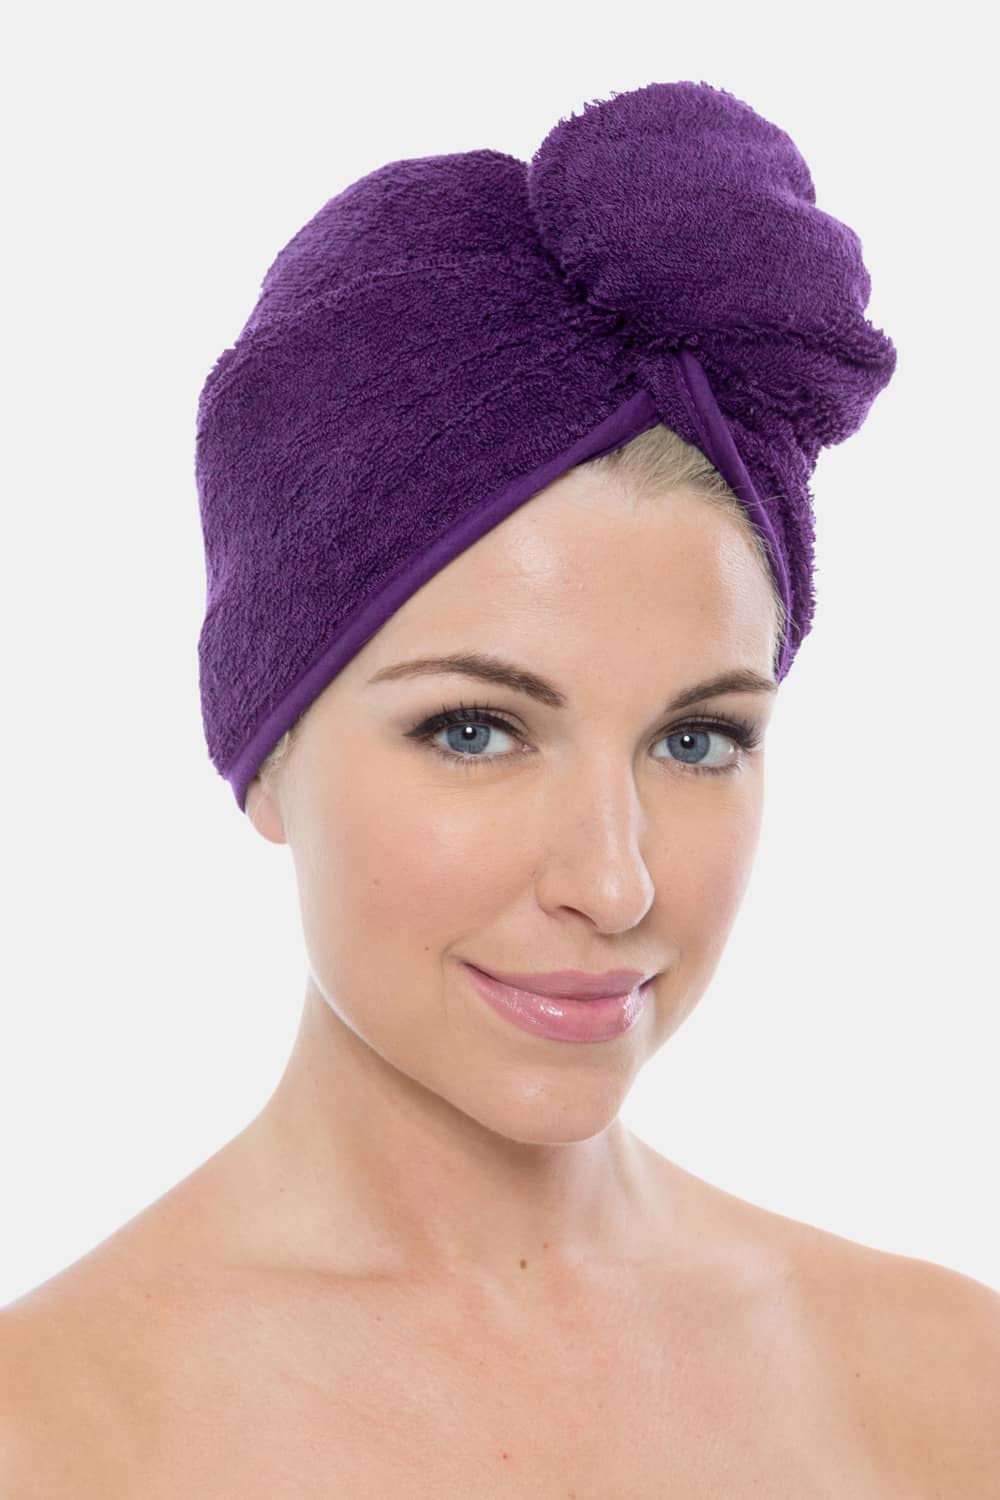 Texere Women's Terry Cloth Hair Towel / Wrap Womens>Spa>Hair Towel Fishers Finery 